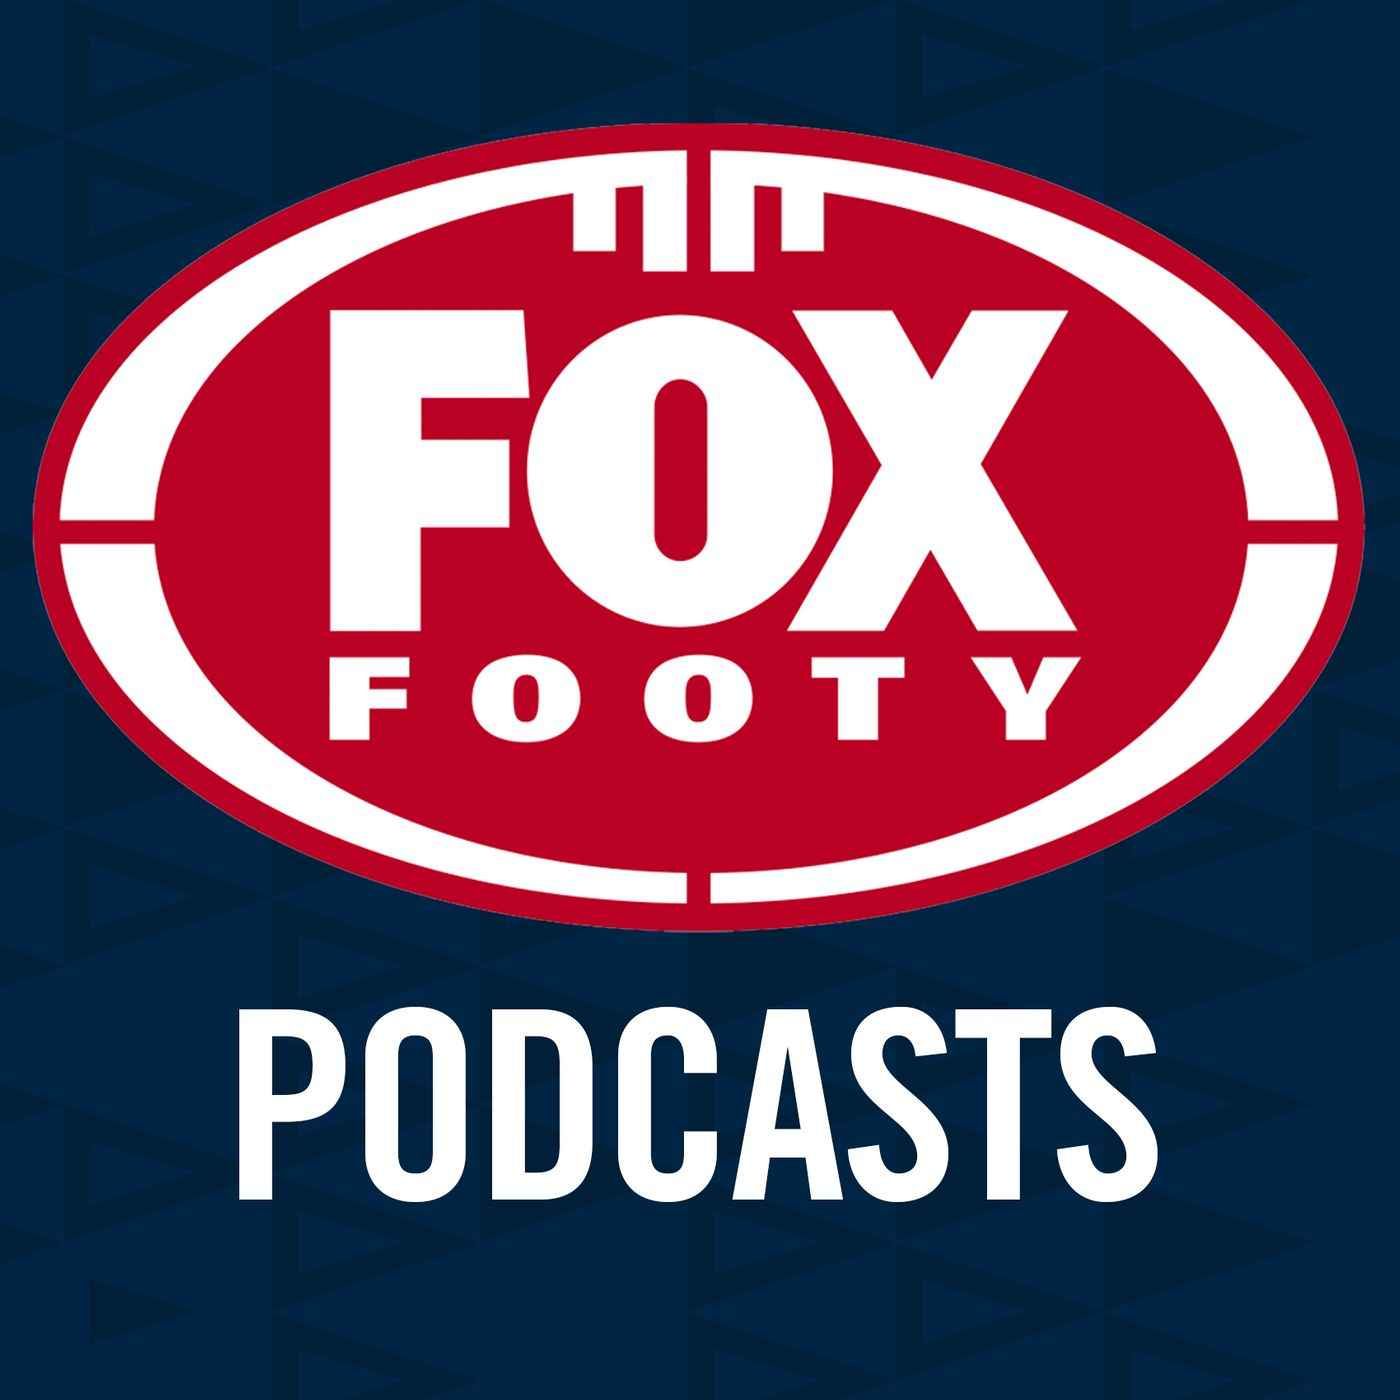 Fox Footy Podcast: Run Home analysed, who makes the eight?